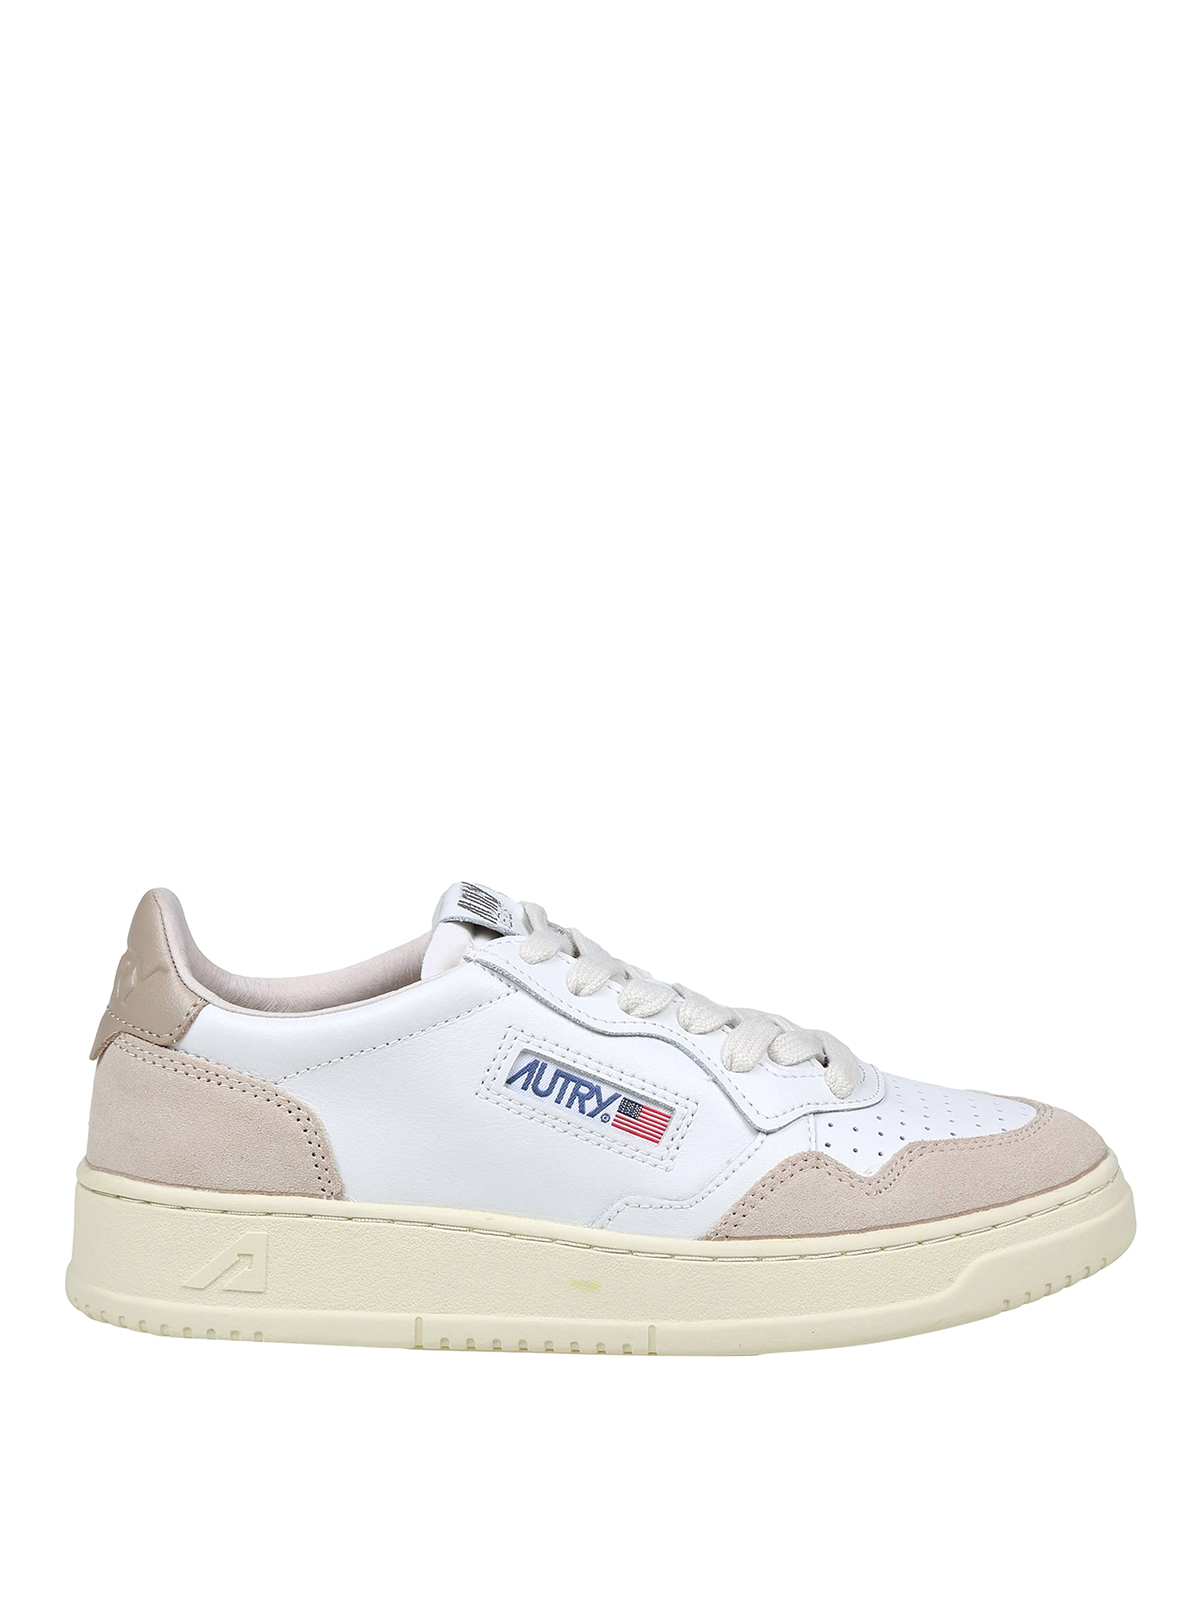 Trainers Autry - Autry sneakers in white leather and suede - AULWLS58